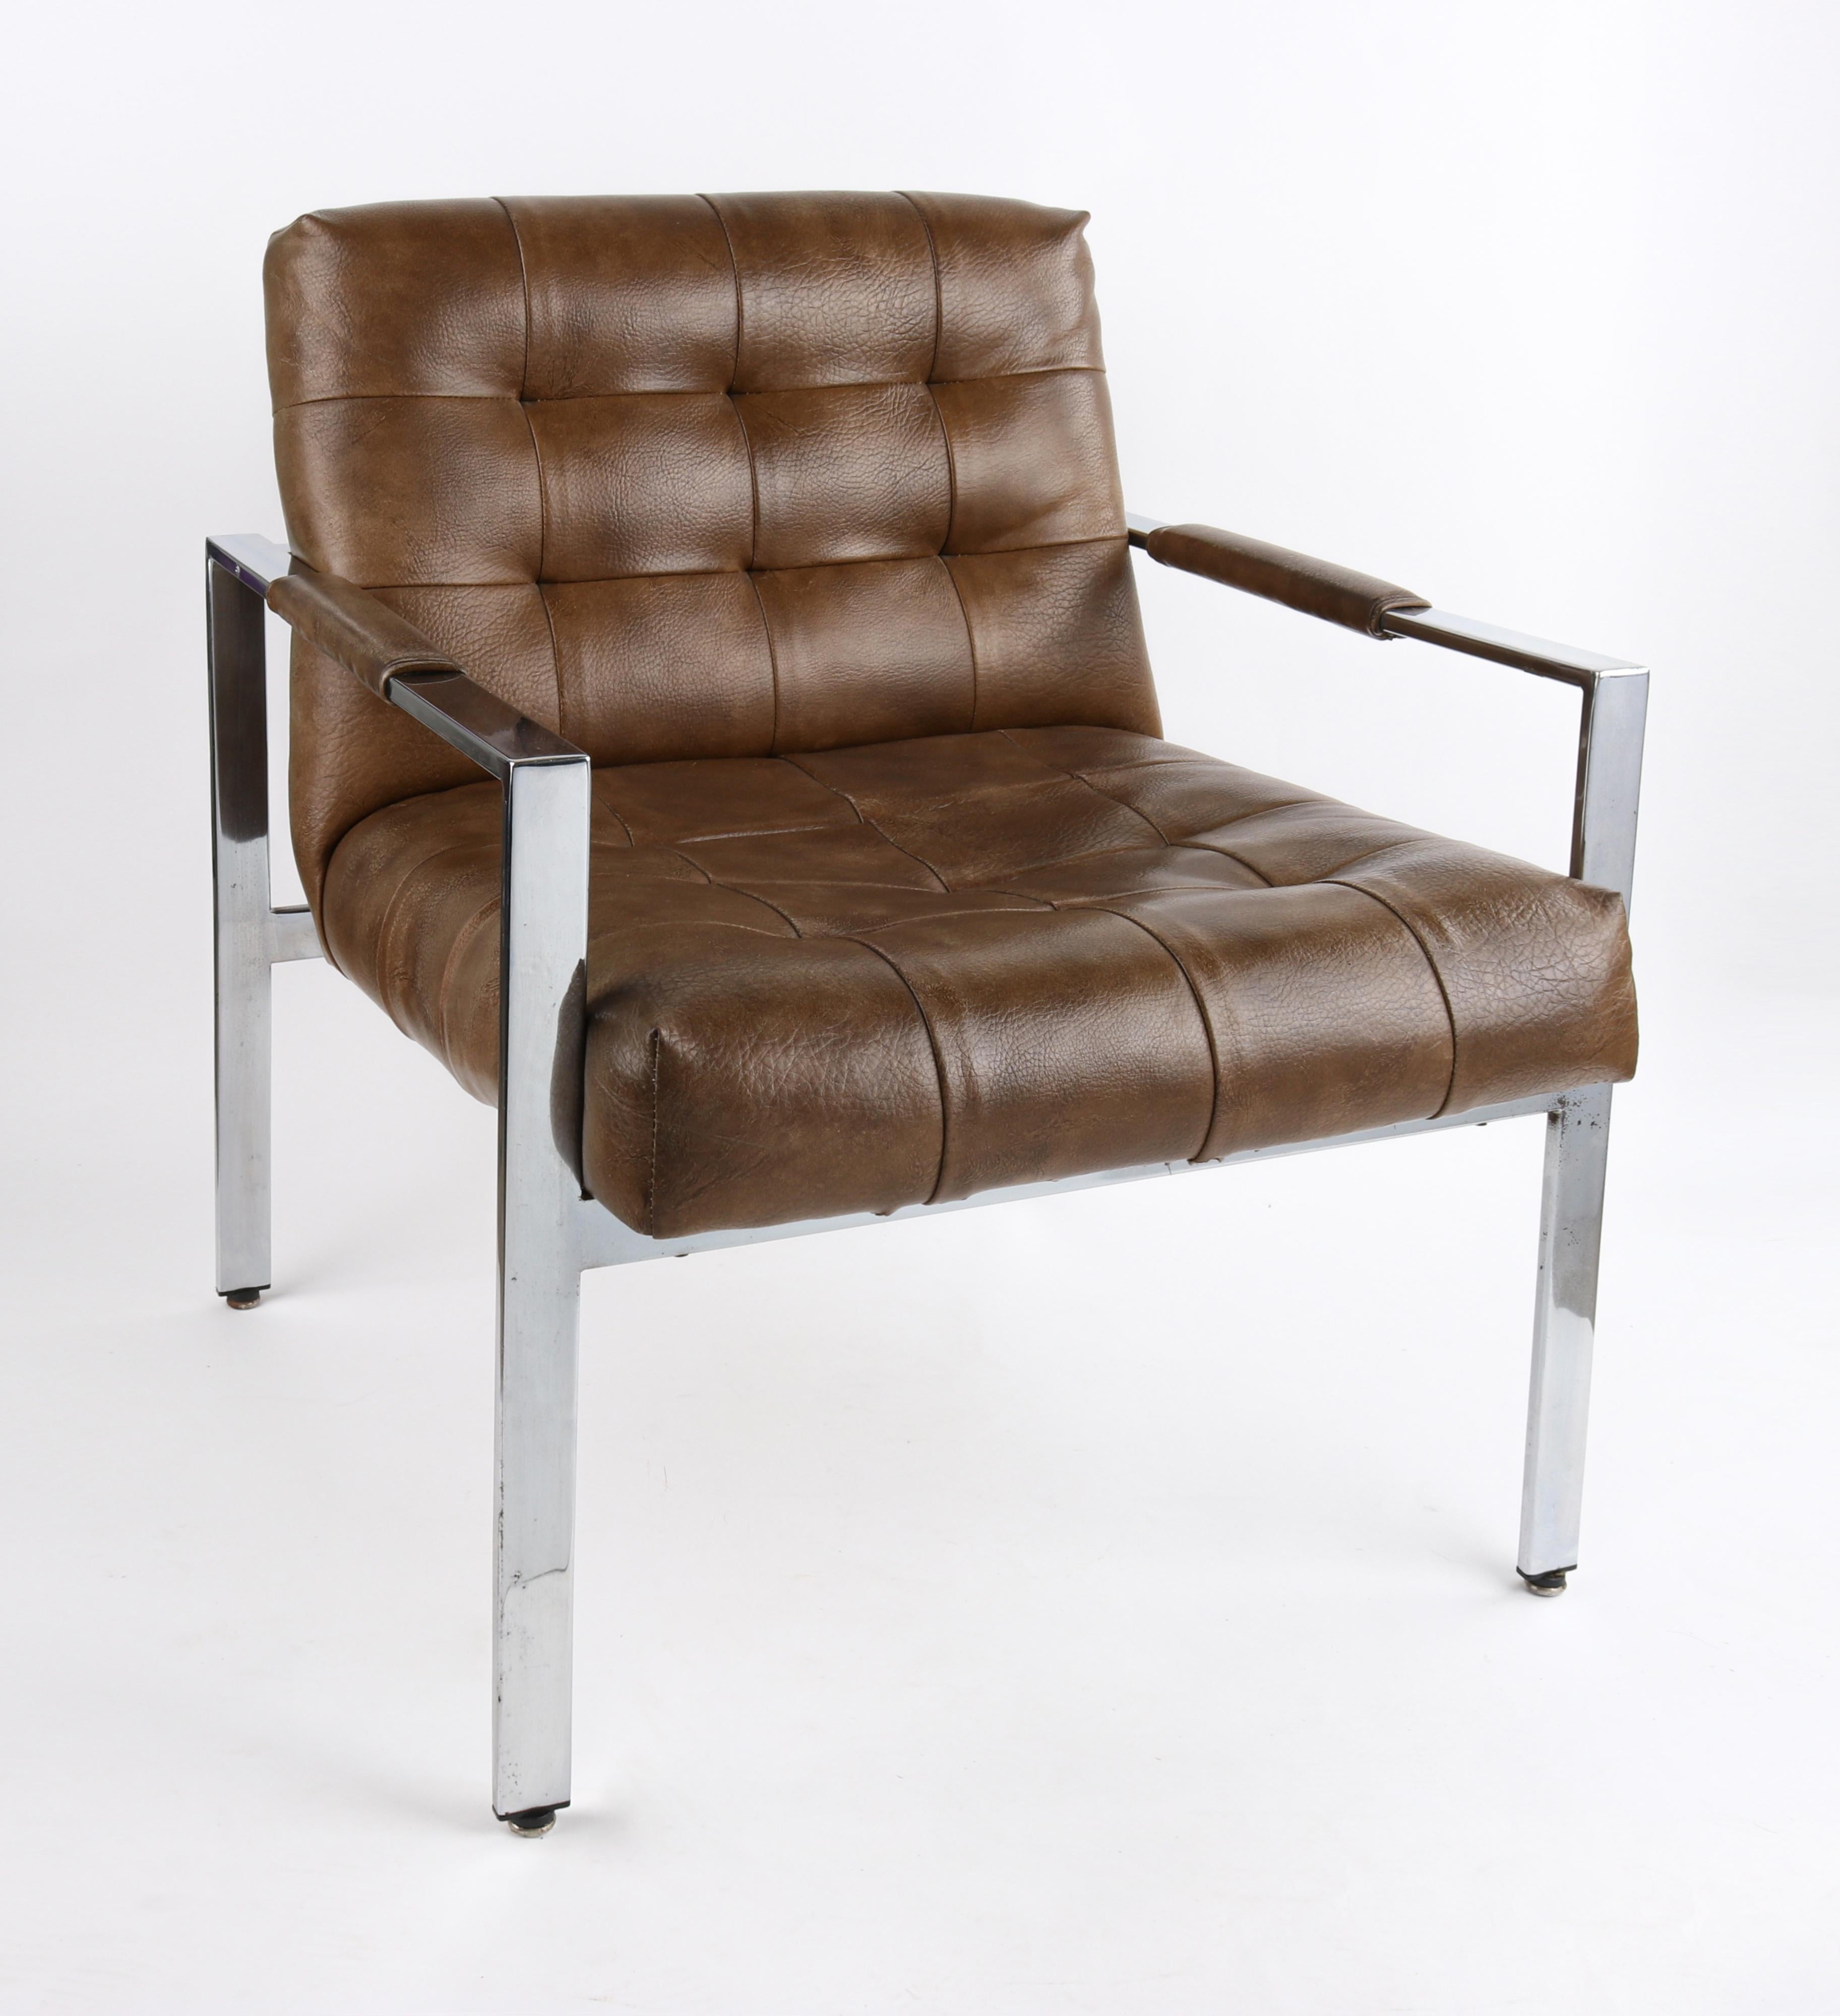 American Milo Baughman Thayer Coggin 1969 Chrome Upholstered Tank Lounge Cantilever Chair For Sale